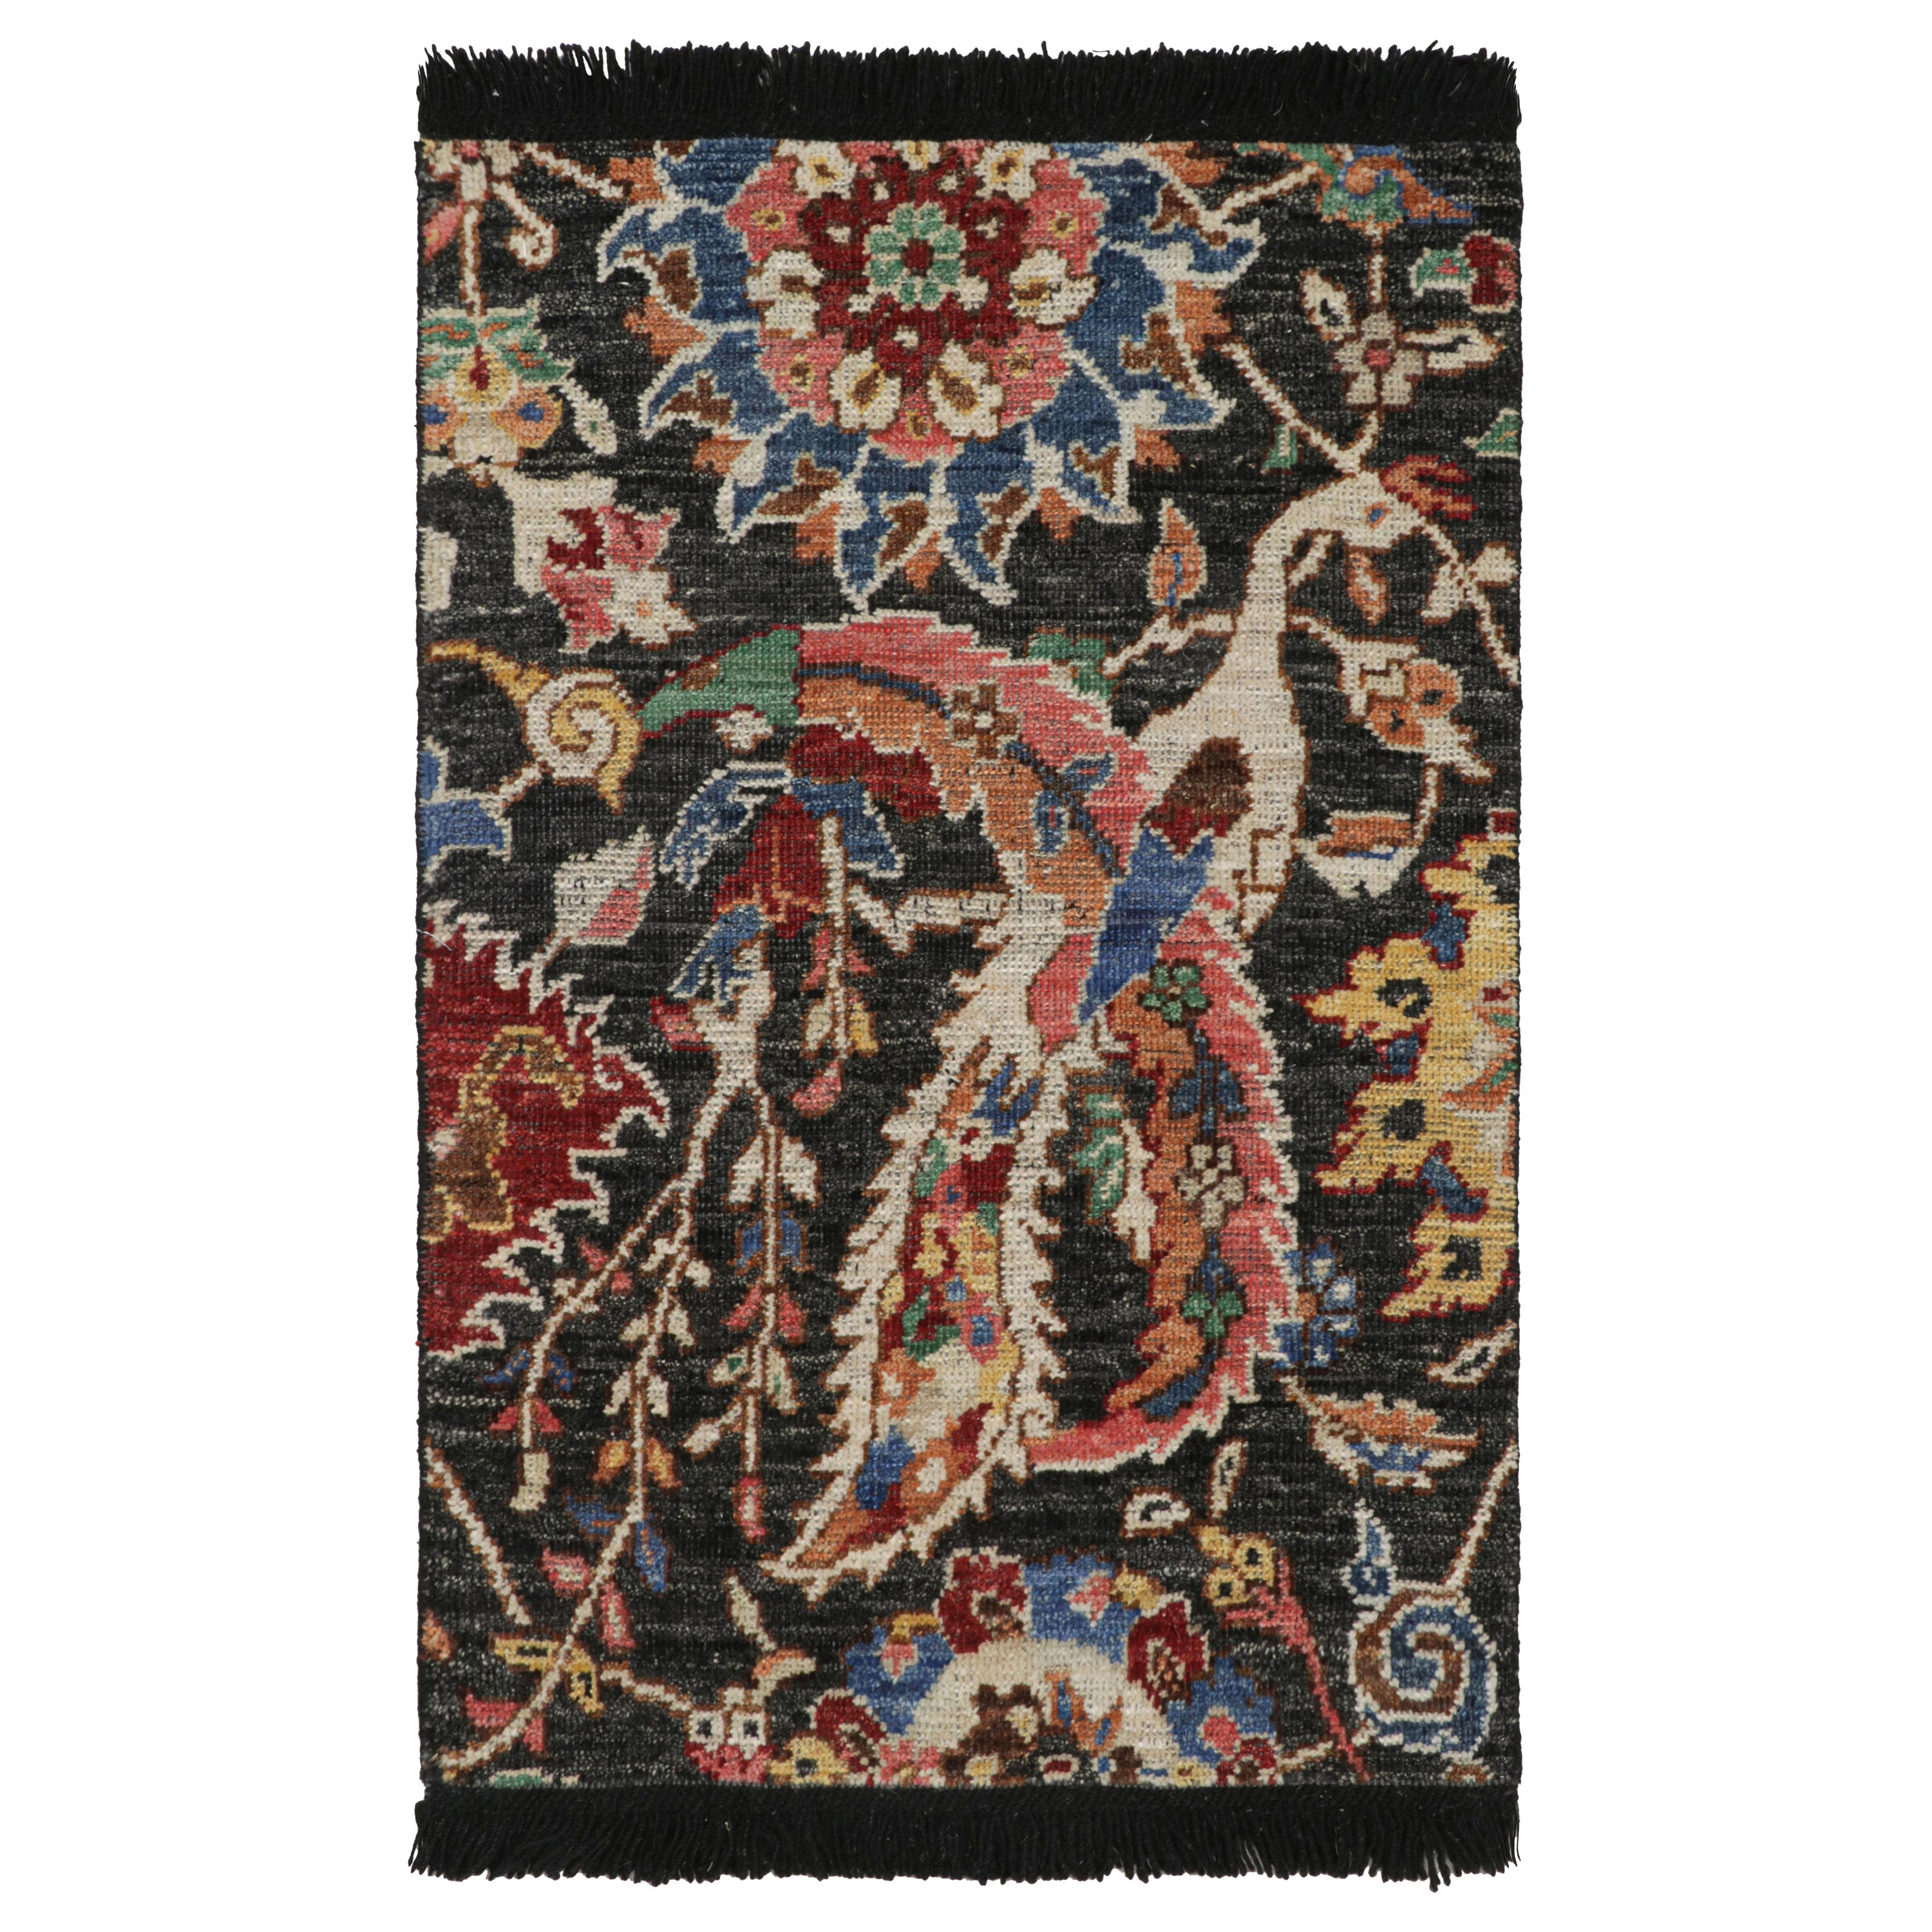 Rug & Kilim’s Persian Kerman Style Rug in Black with Vibrant Floral Patterns 